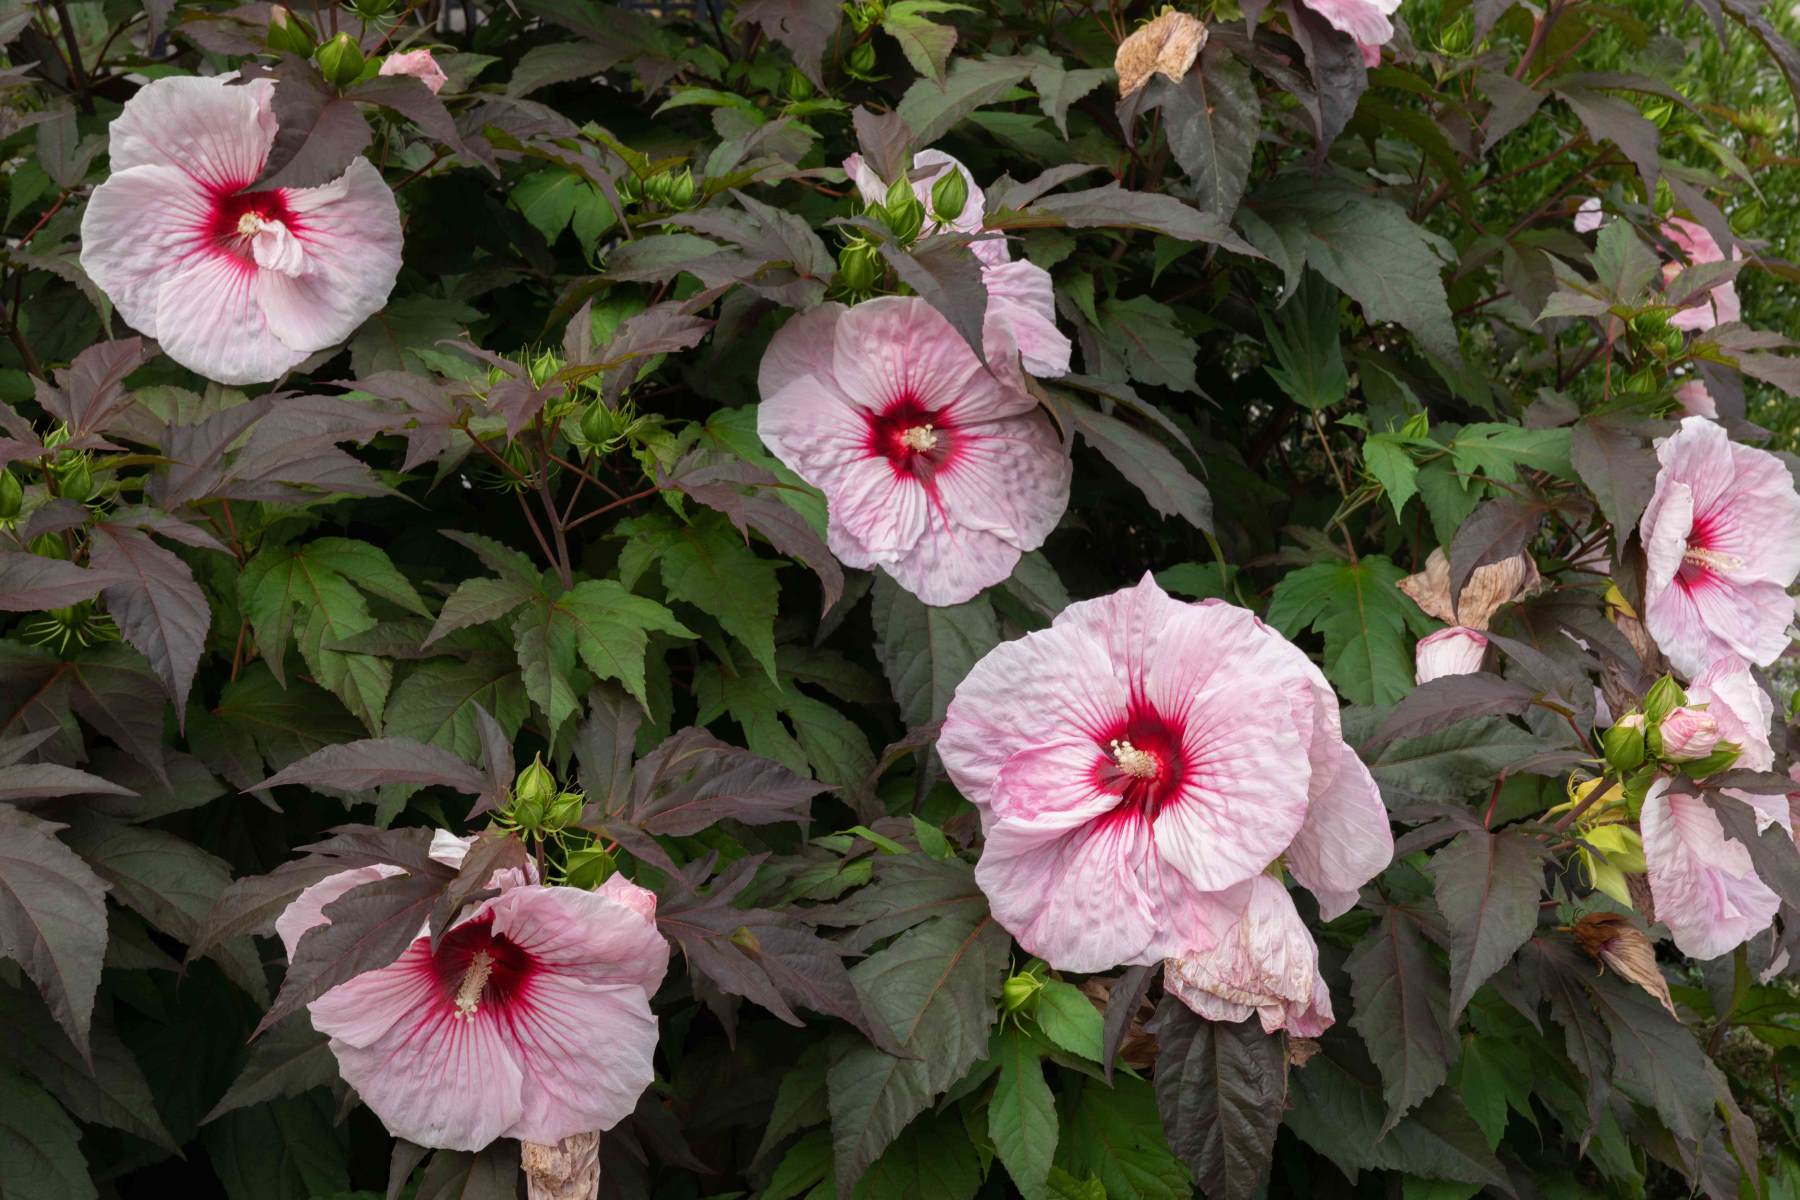 The Ultimate Guide To Growing Hardy Hibiscus In NYC: Watering, Fertilizing, And Pruning Tips Revealed!